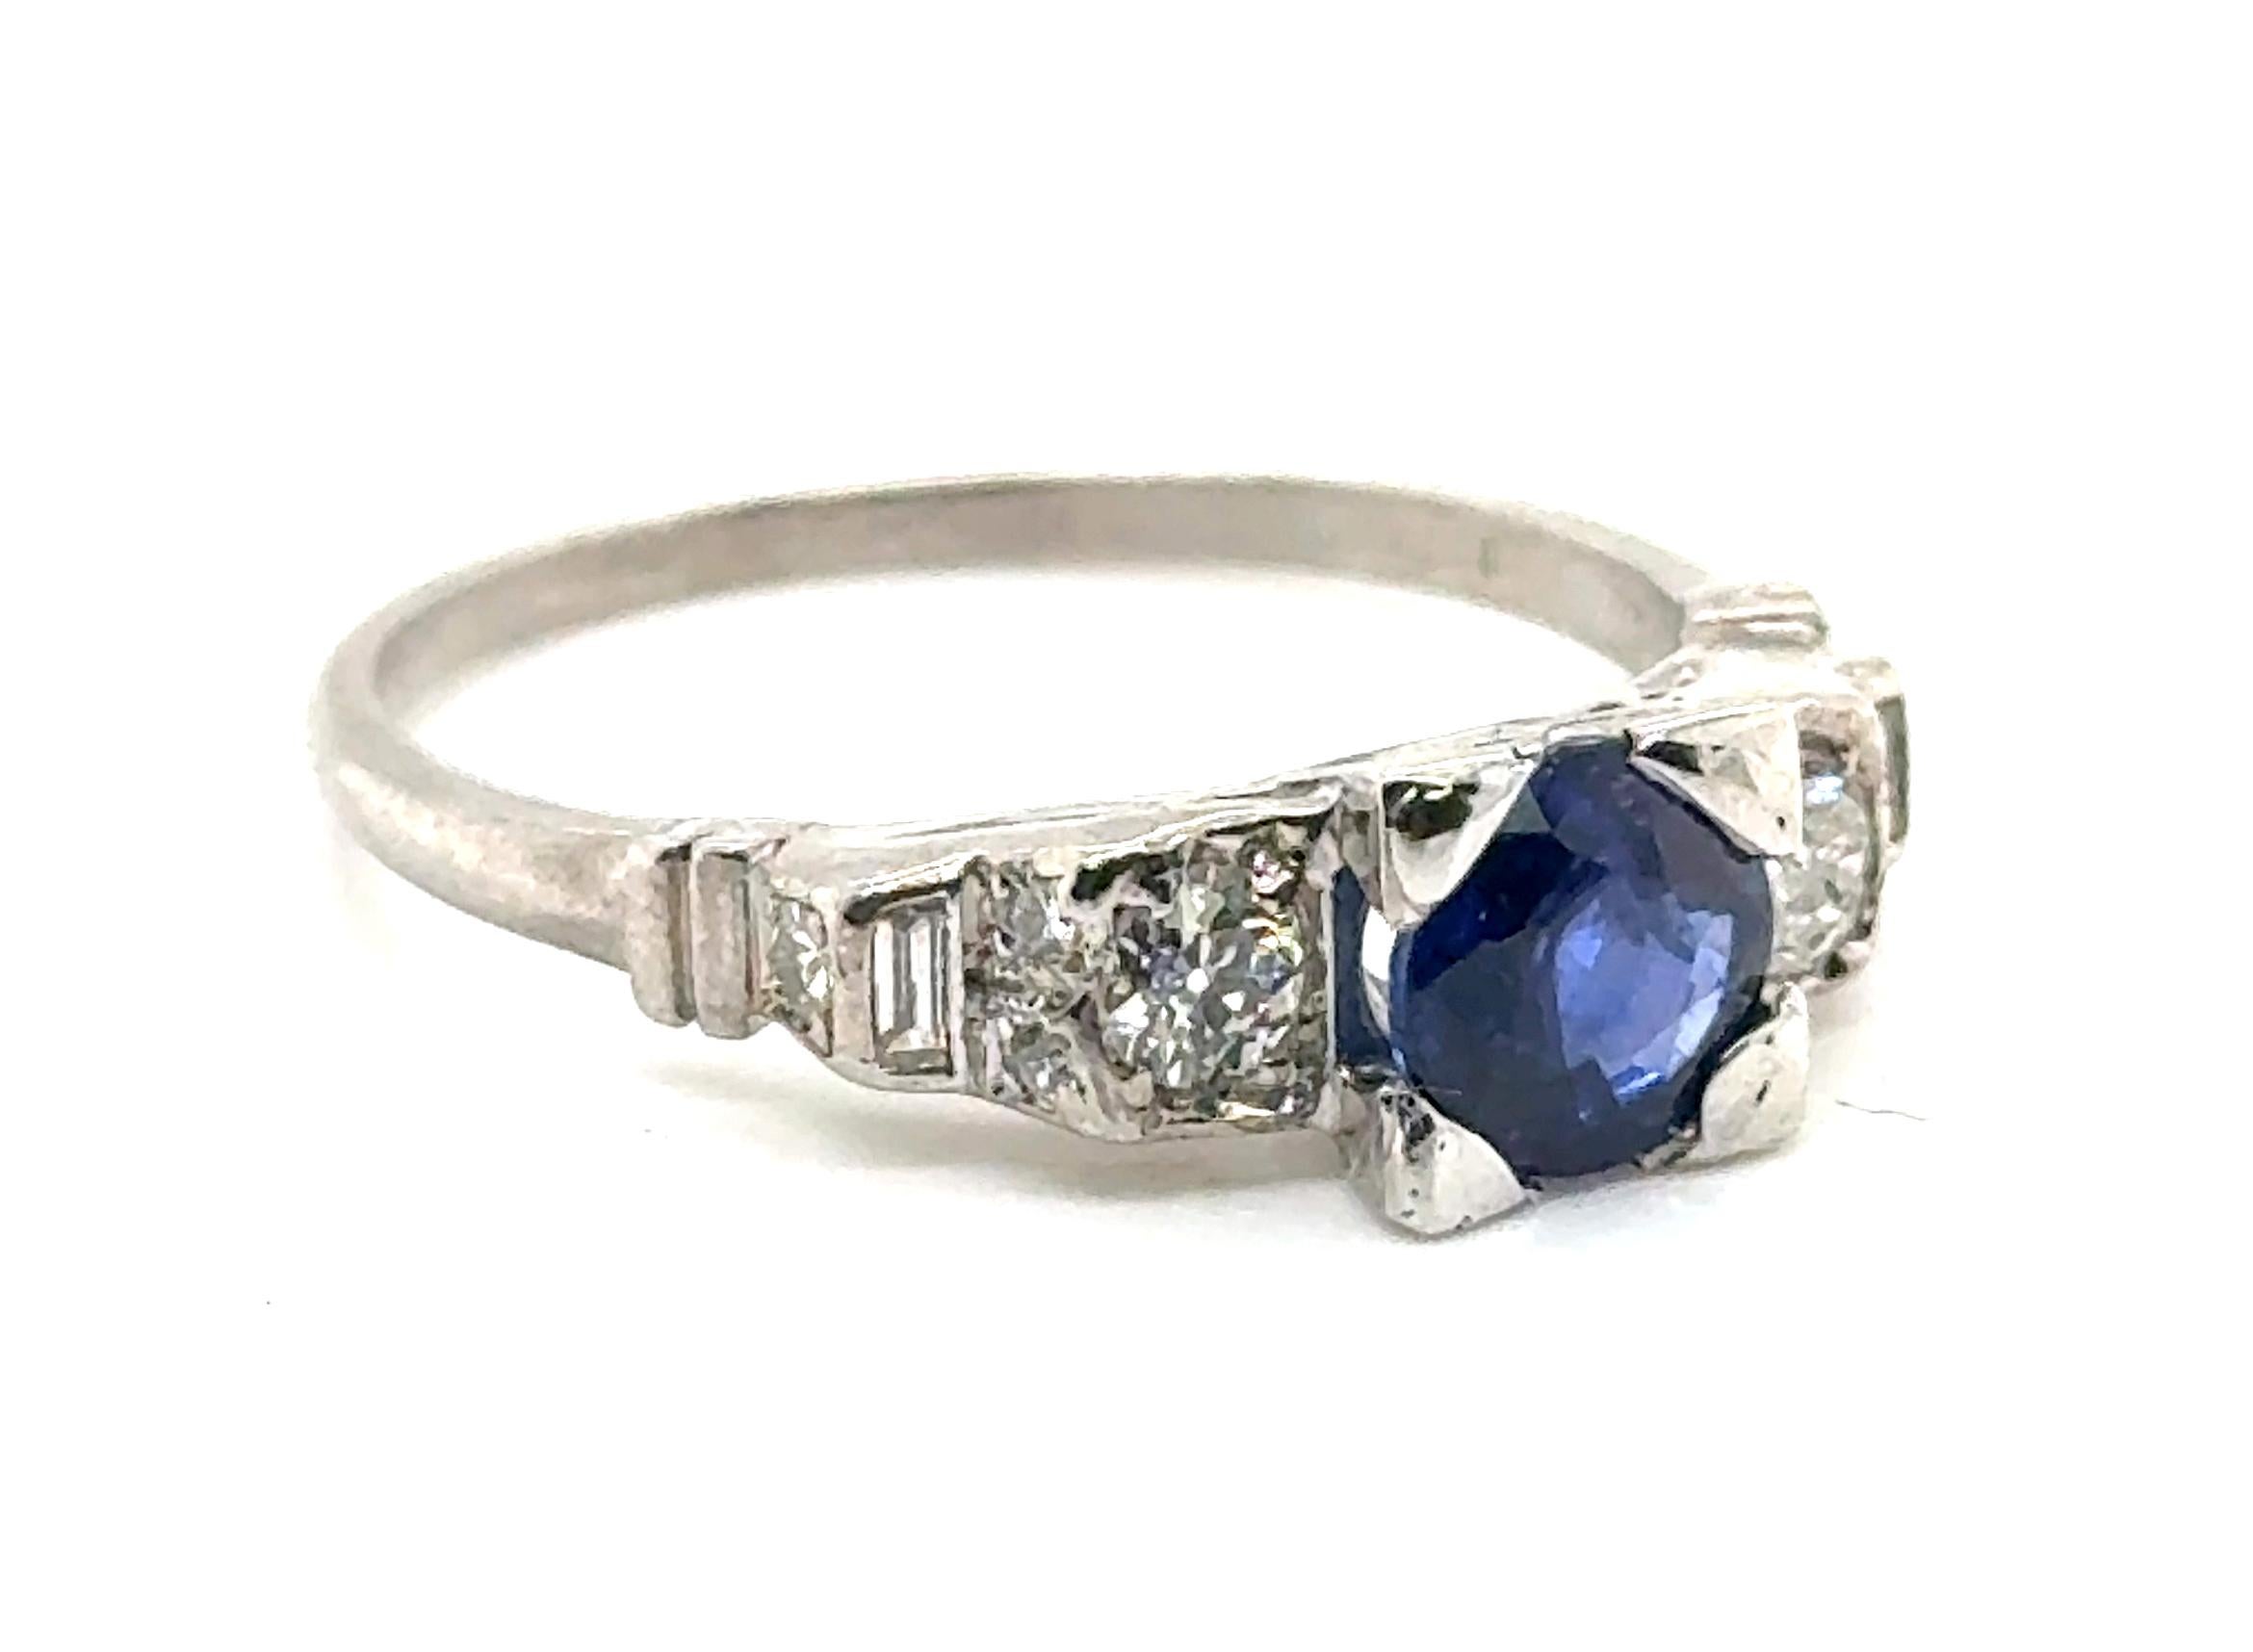 Genuine Original Art Deco Antique from 1920's-1930's Sapphire and Diamond Ring 1.50ct Vintage Platinum


Features a Genuine 1ct Natural Blue Round Sapphire at its Center

On Either Side of the Sapphire are Genuine Old European Cut Diamonds

Timeless